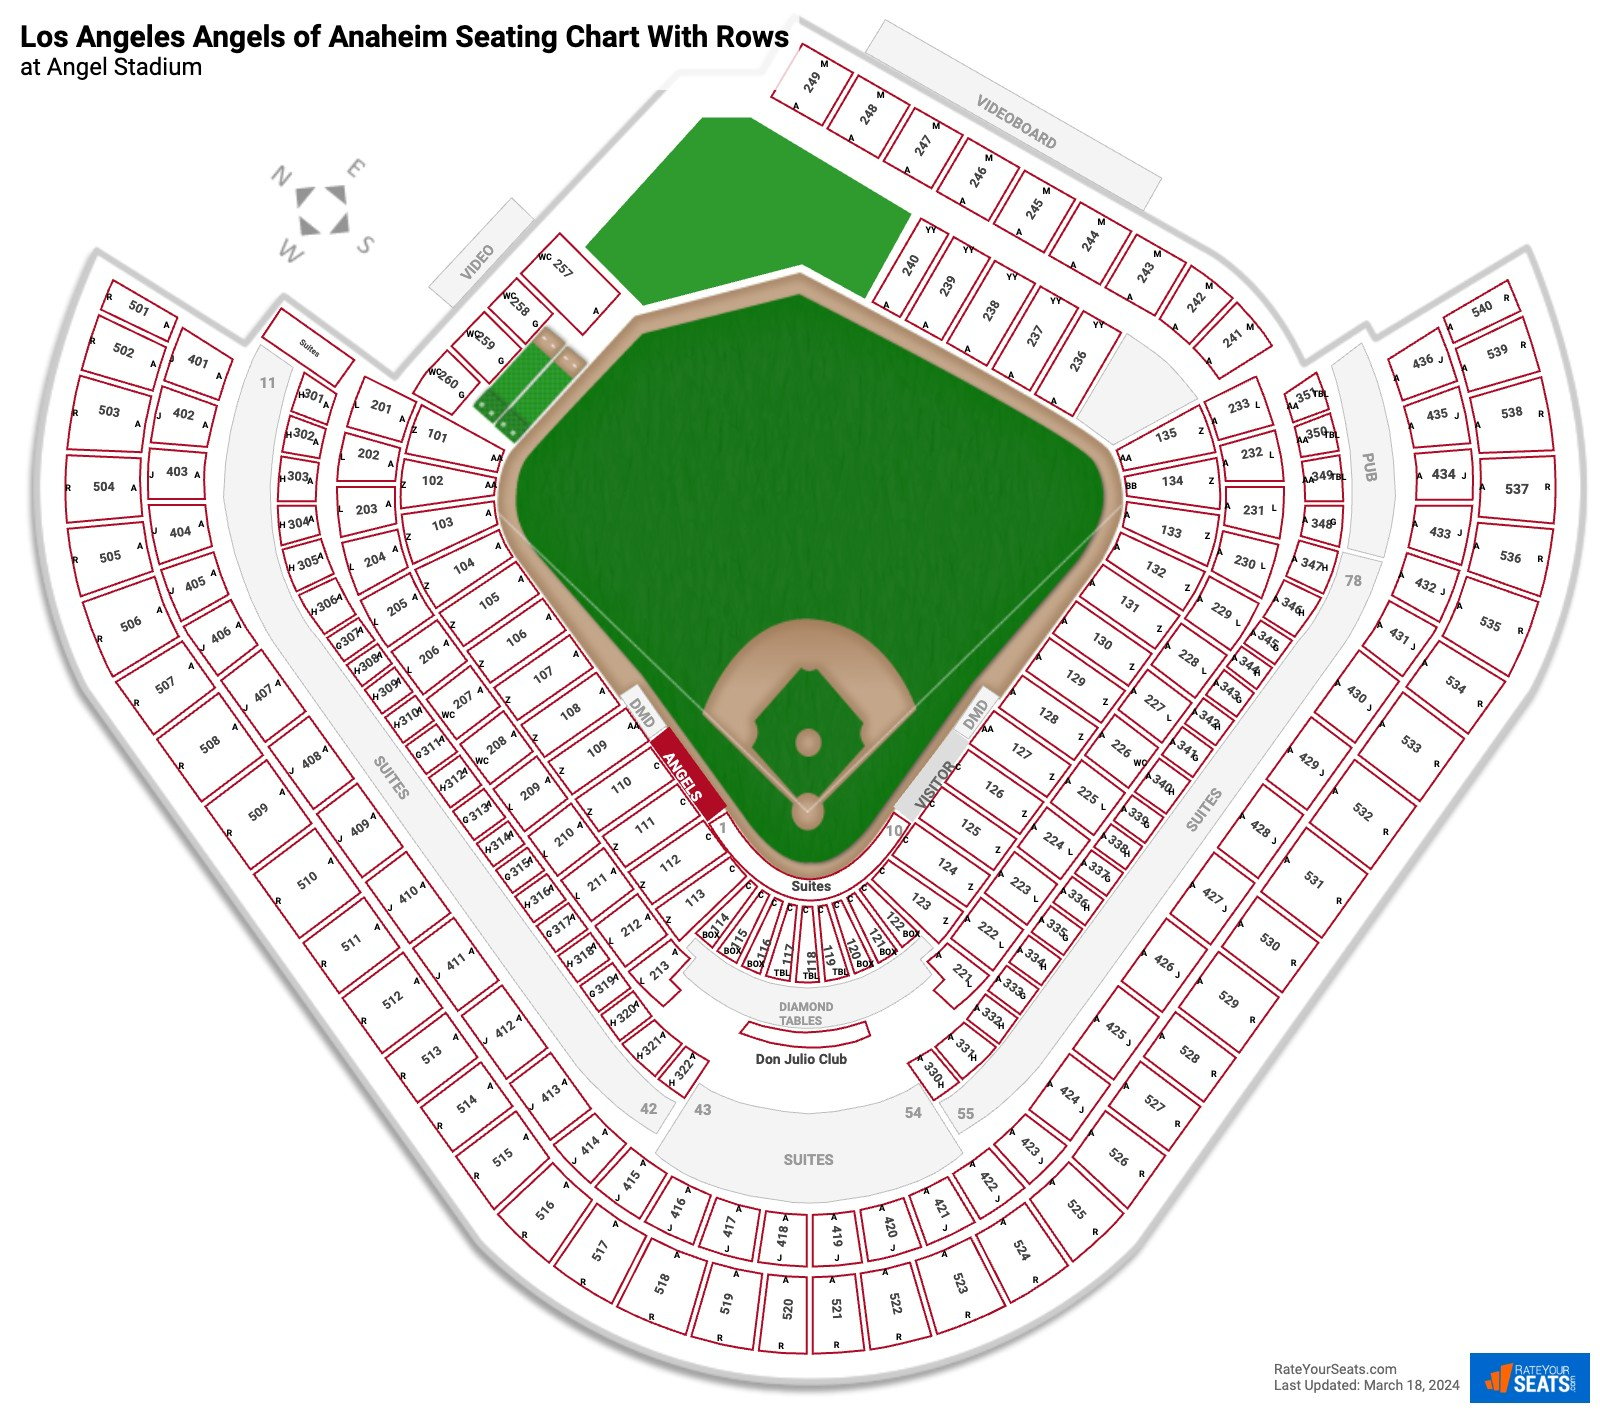 Angel Stadium seating chart with row numbers